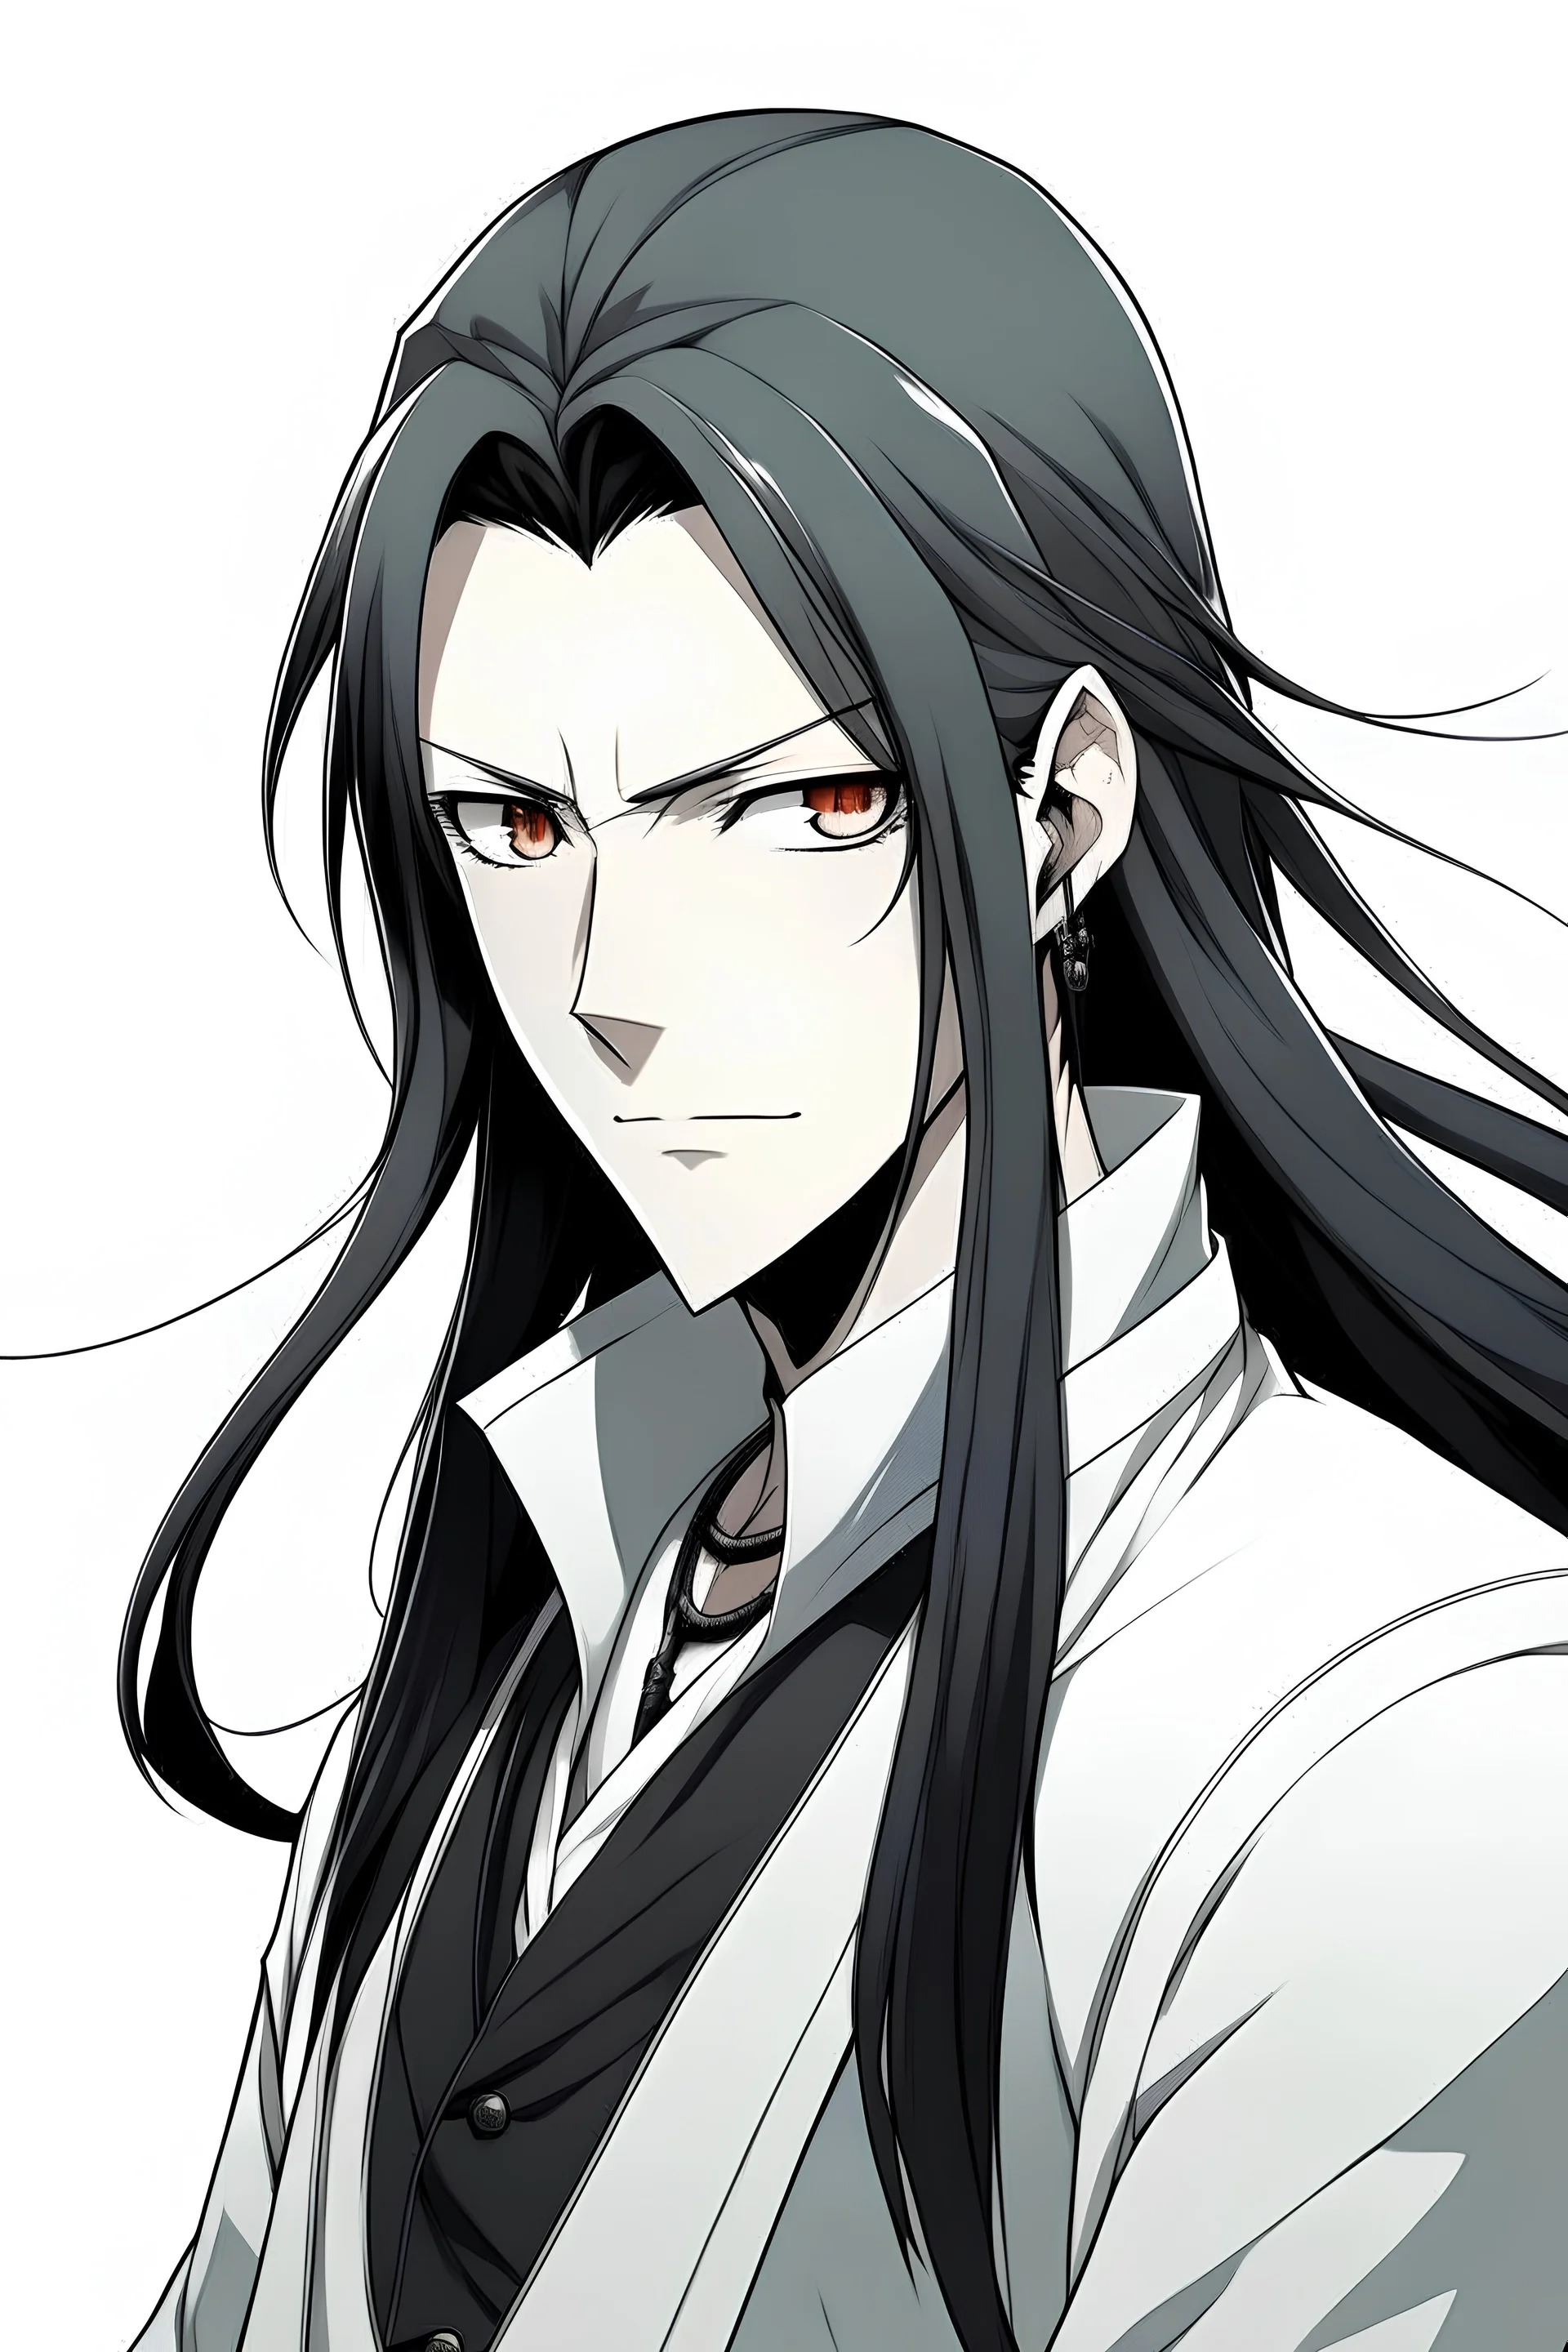 Anime man with long black hair tied, black eyes, and a white background